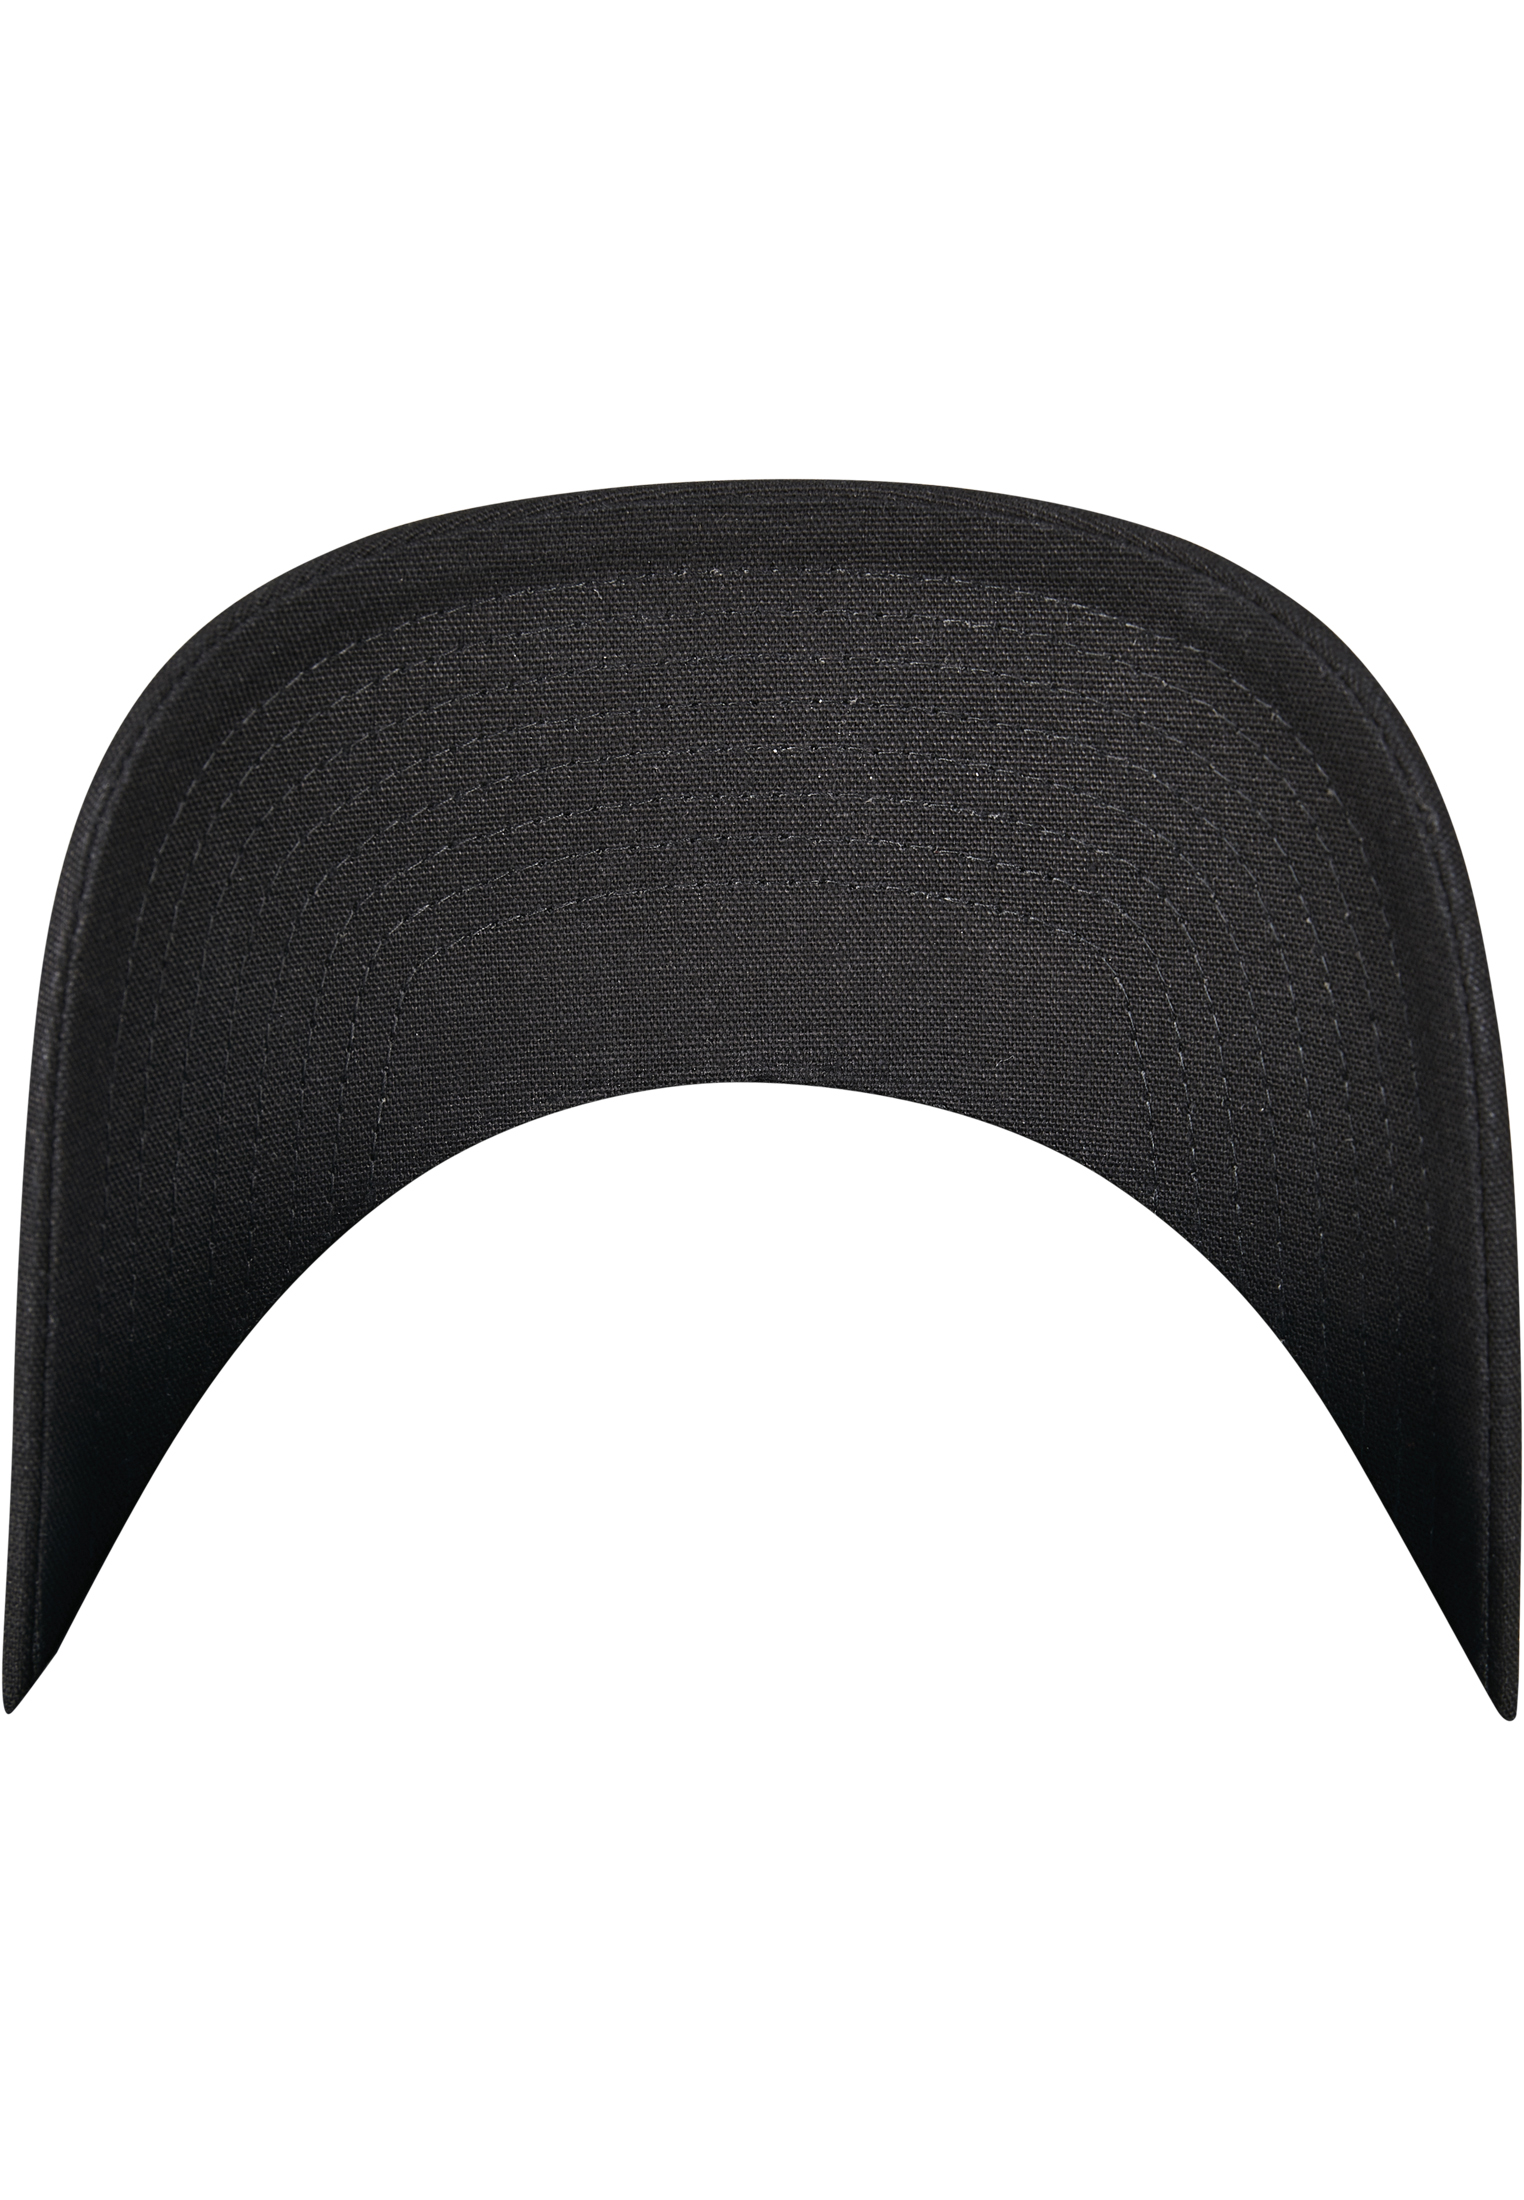 6-Panel Curved Metal Snap-7708MS